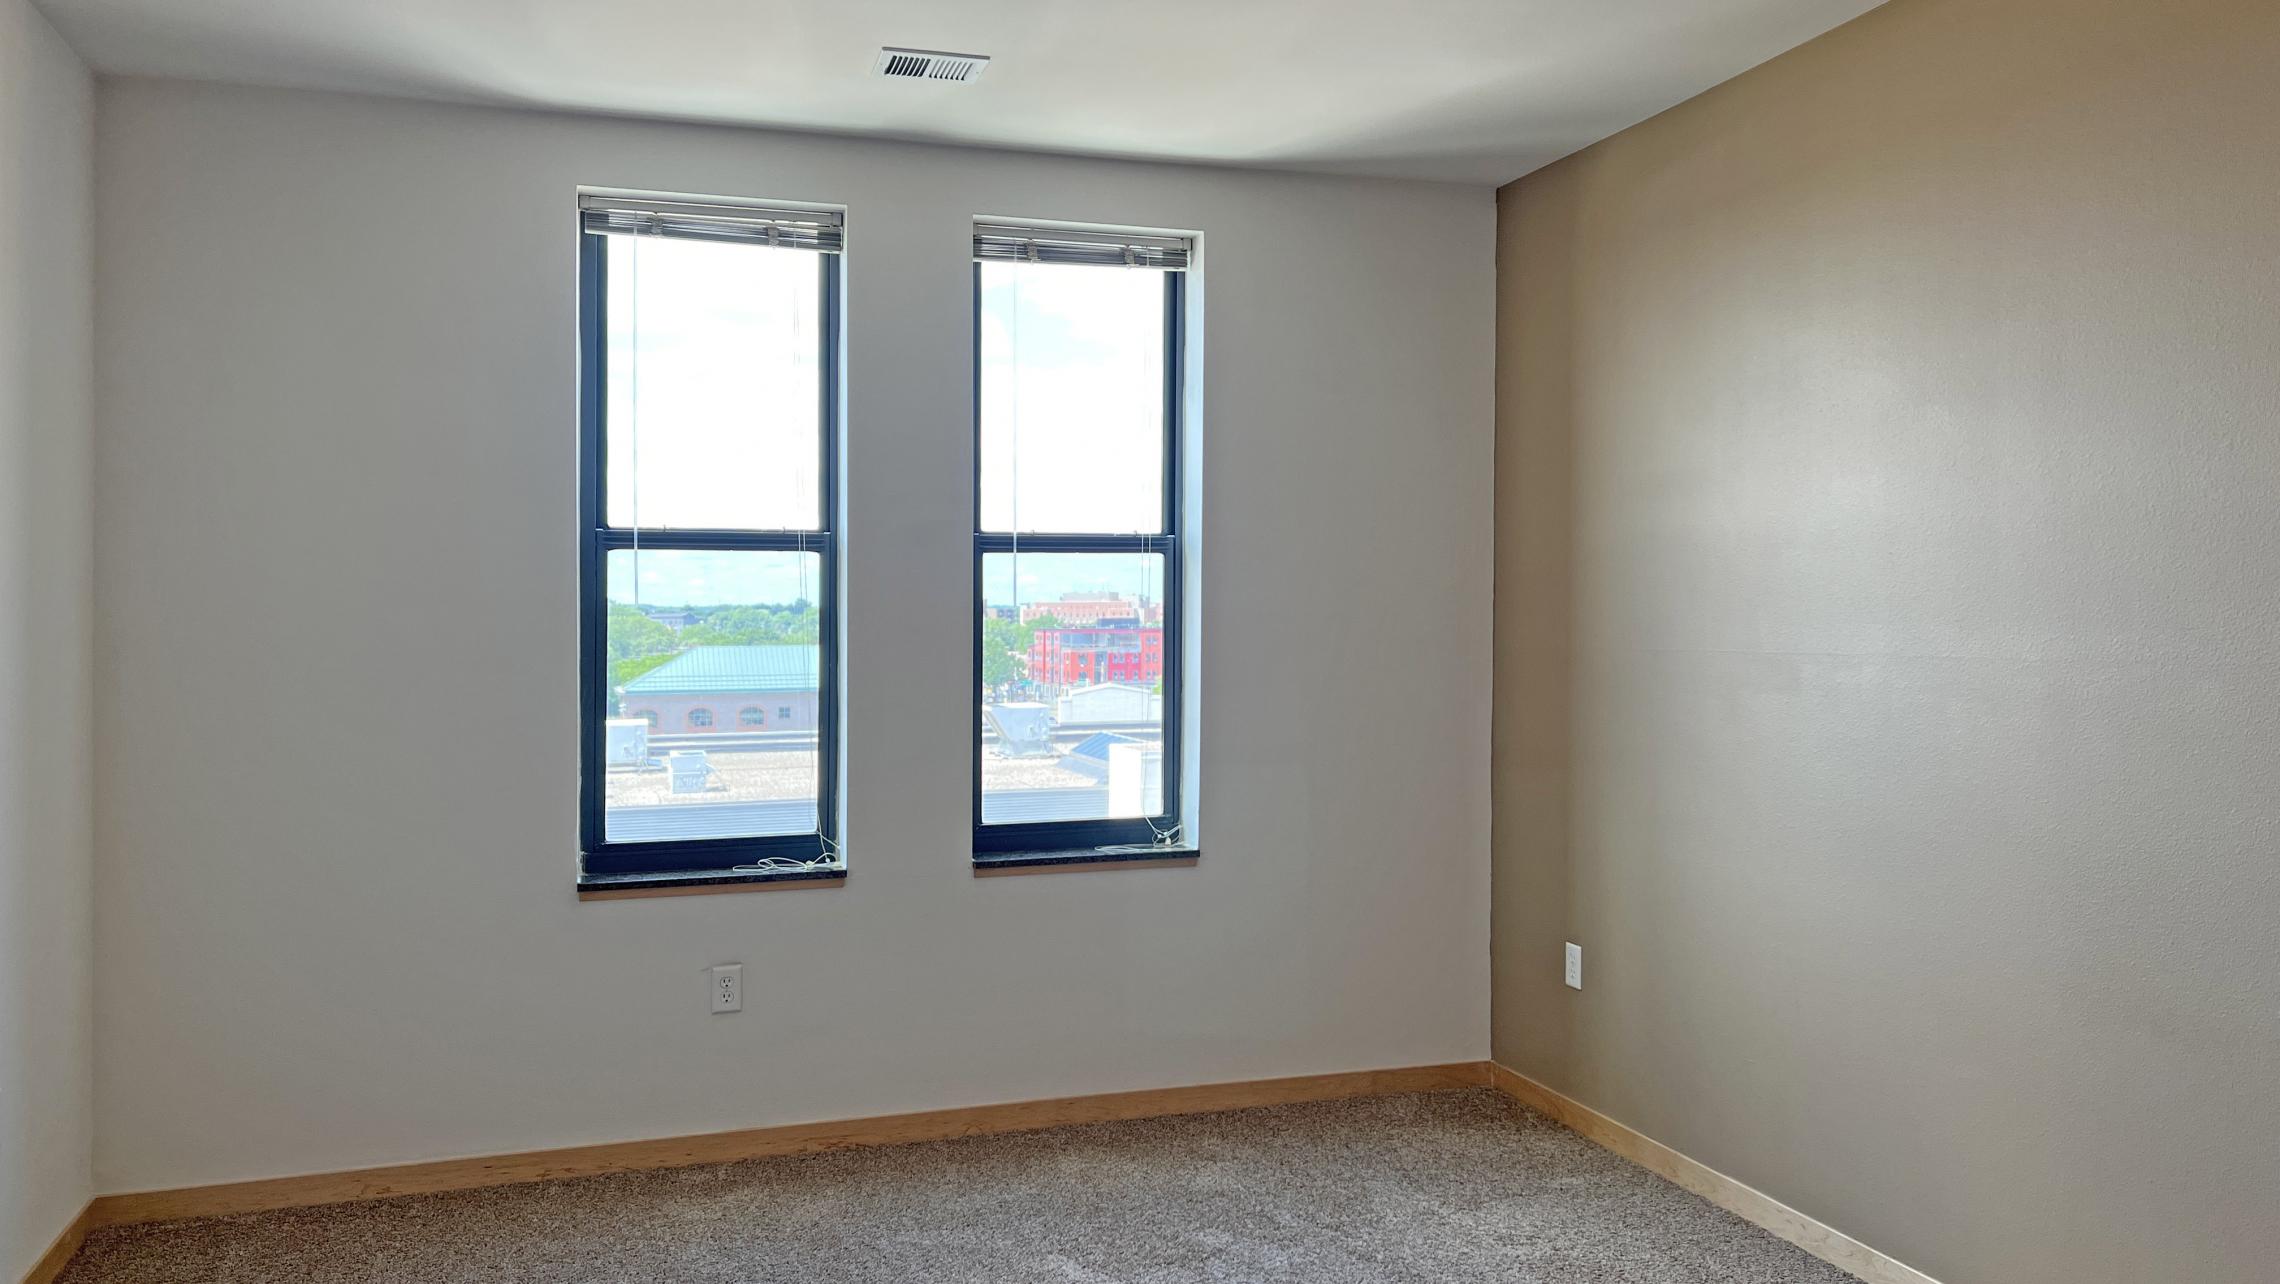 The-Depot-Apartment-1-512-One-Bedroom-Downtown-Madison-Capitol-View-Balcony-Lake-Cats-Fintess-Terrace-City-Living-Kithcen-Bathroom-Upscale